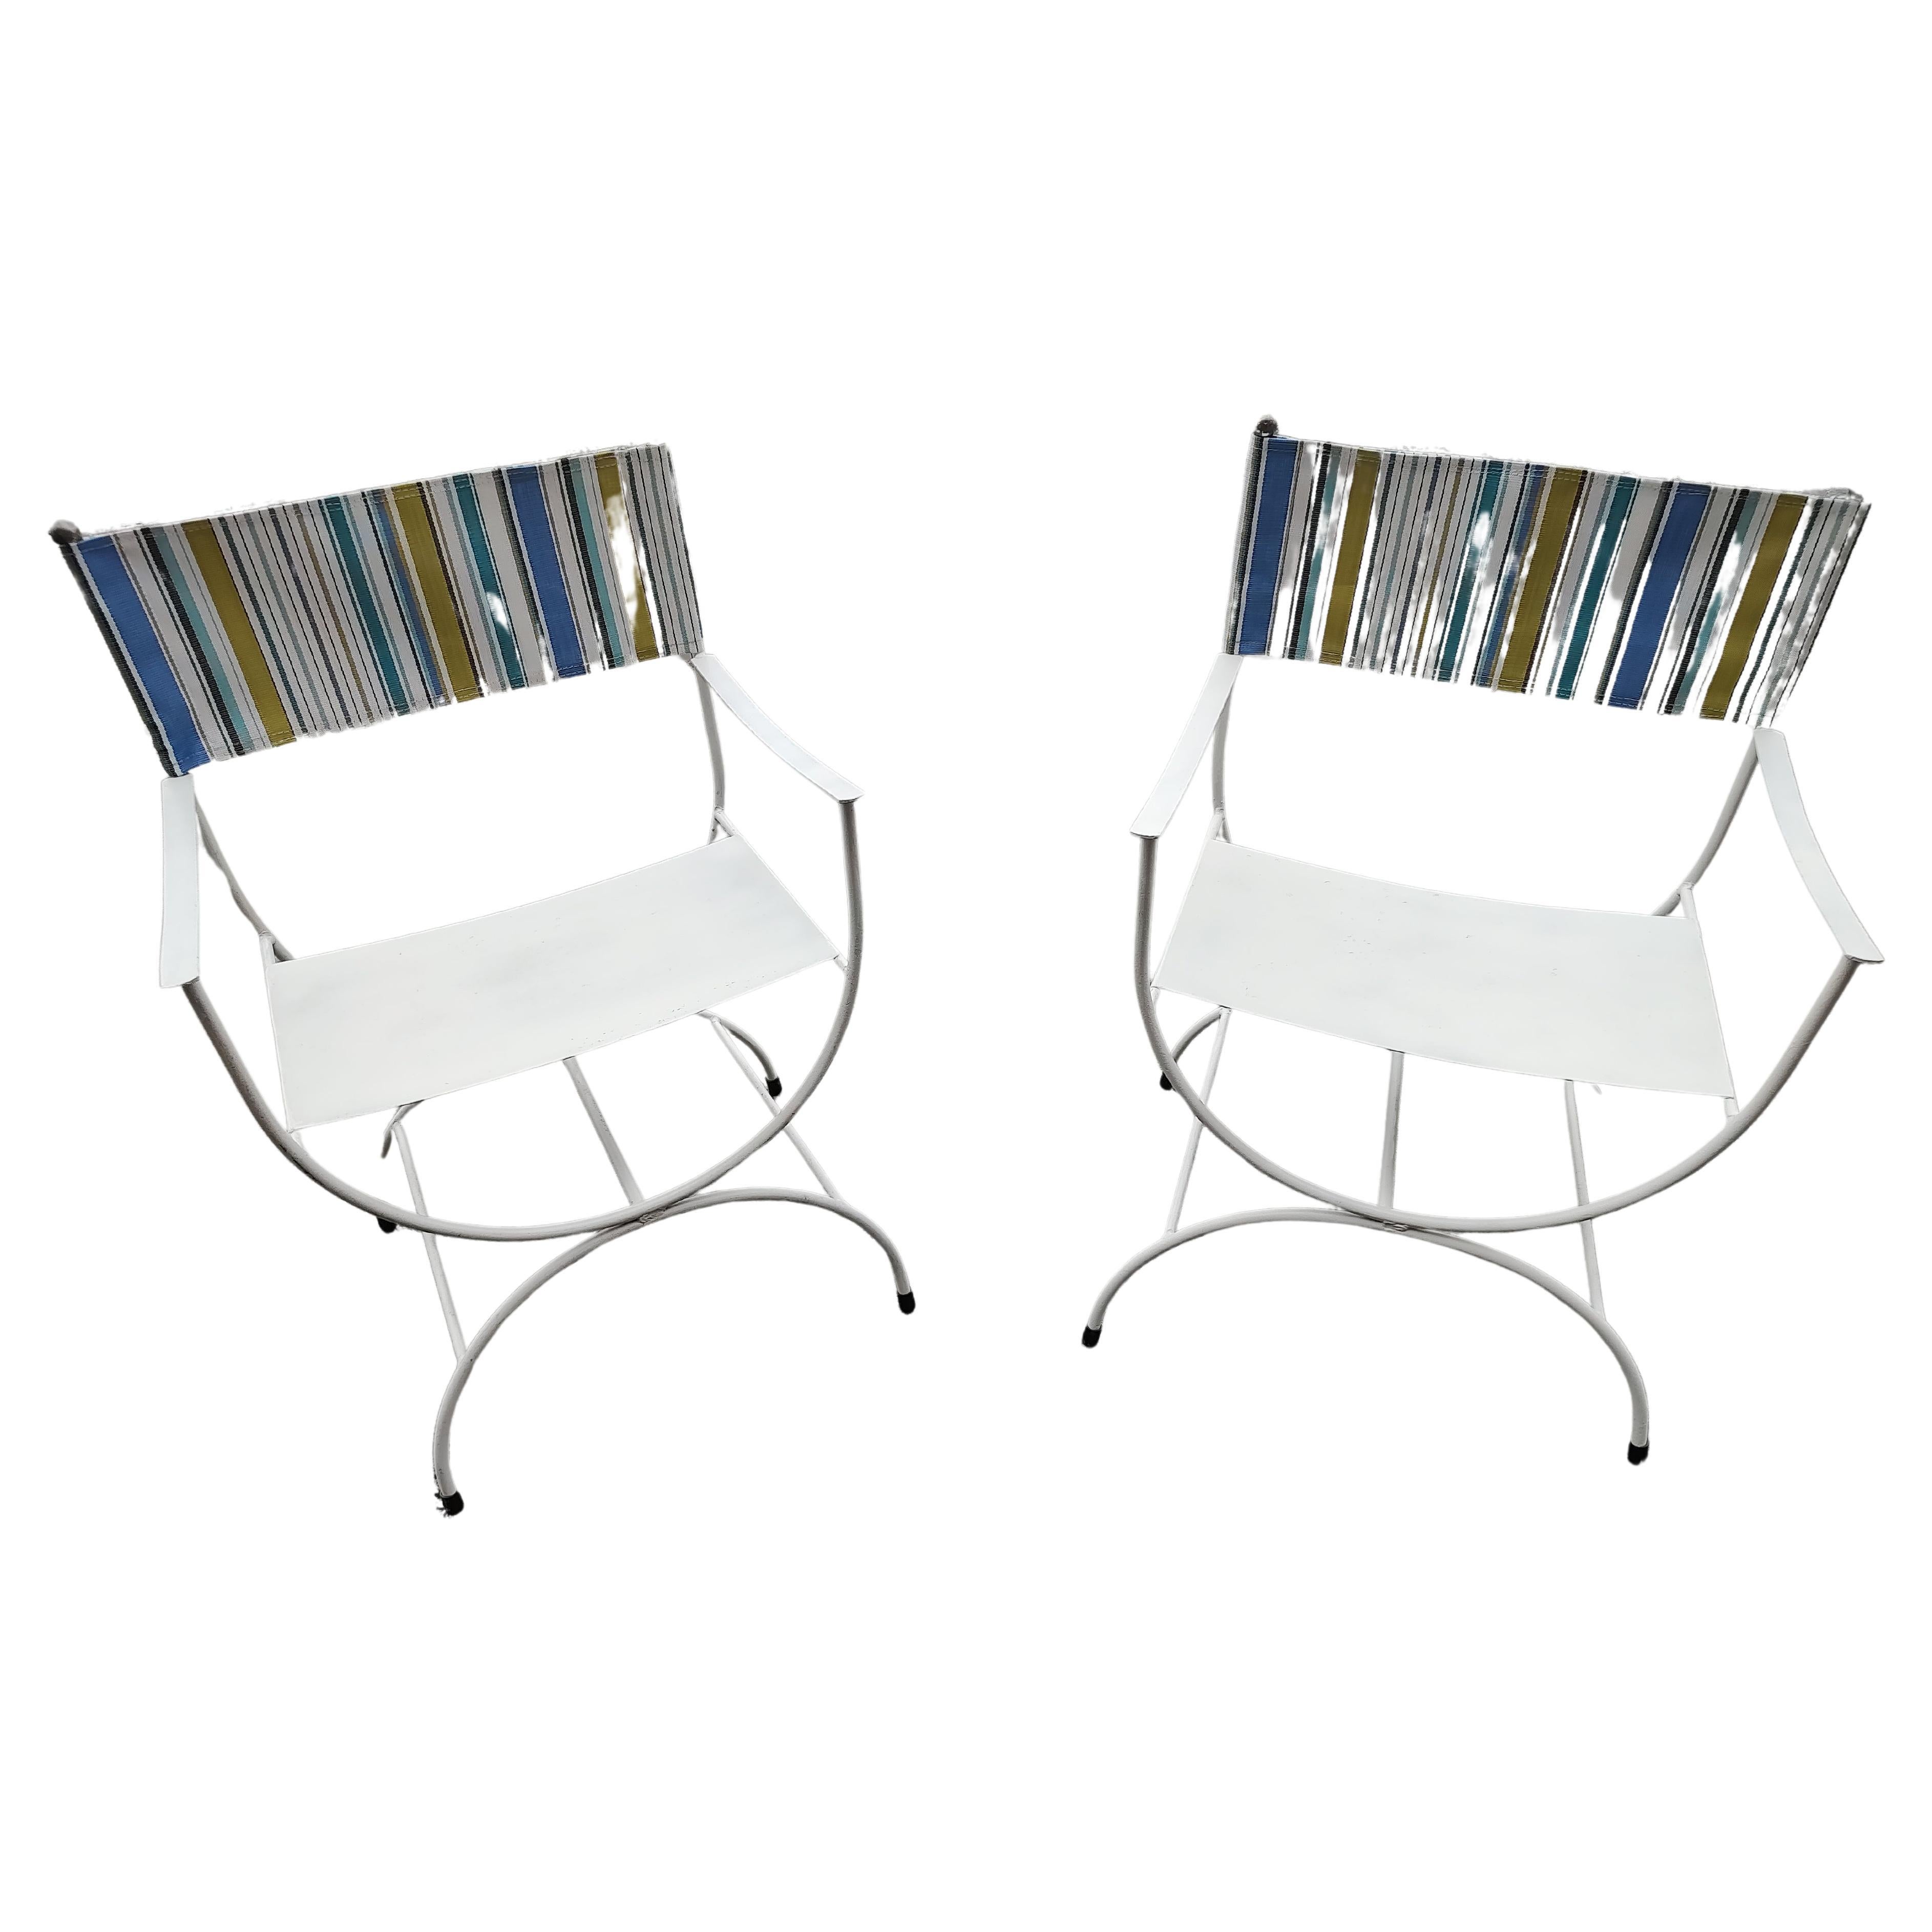 Pair of Mid Century Modern Patio Directors Chairs with Sunbrella Backs 1960 For Sale 1